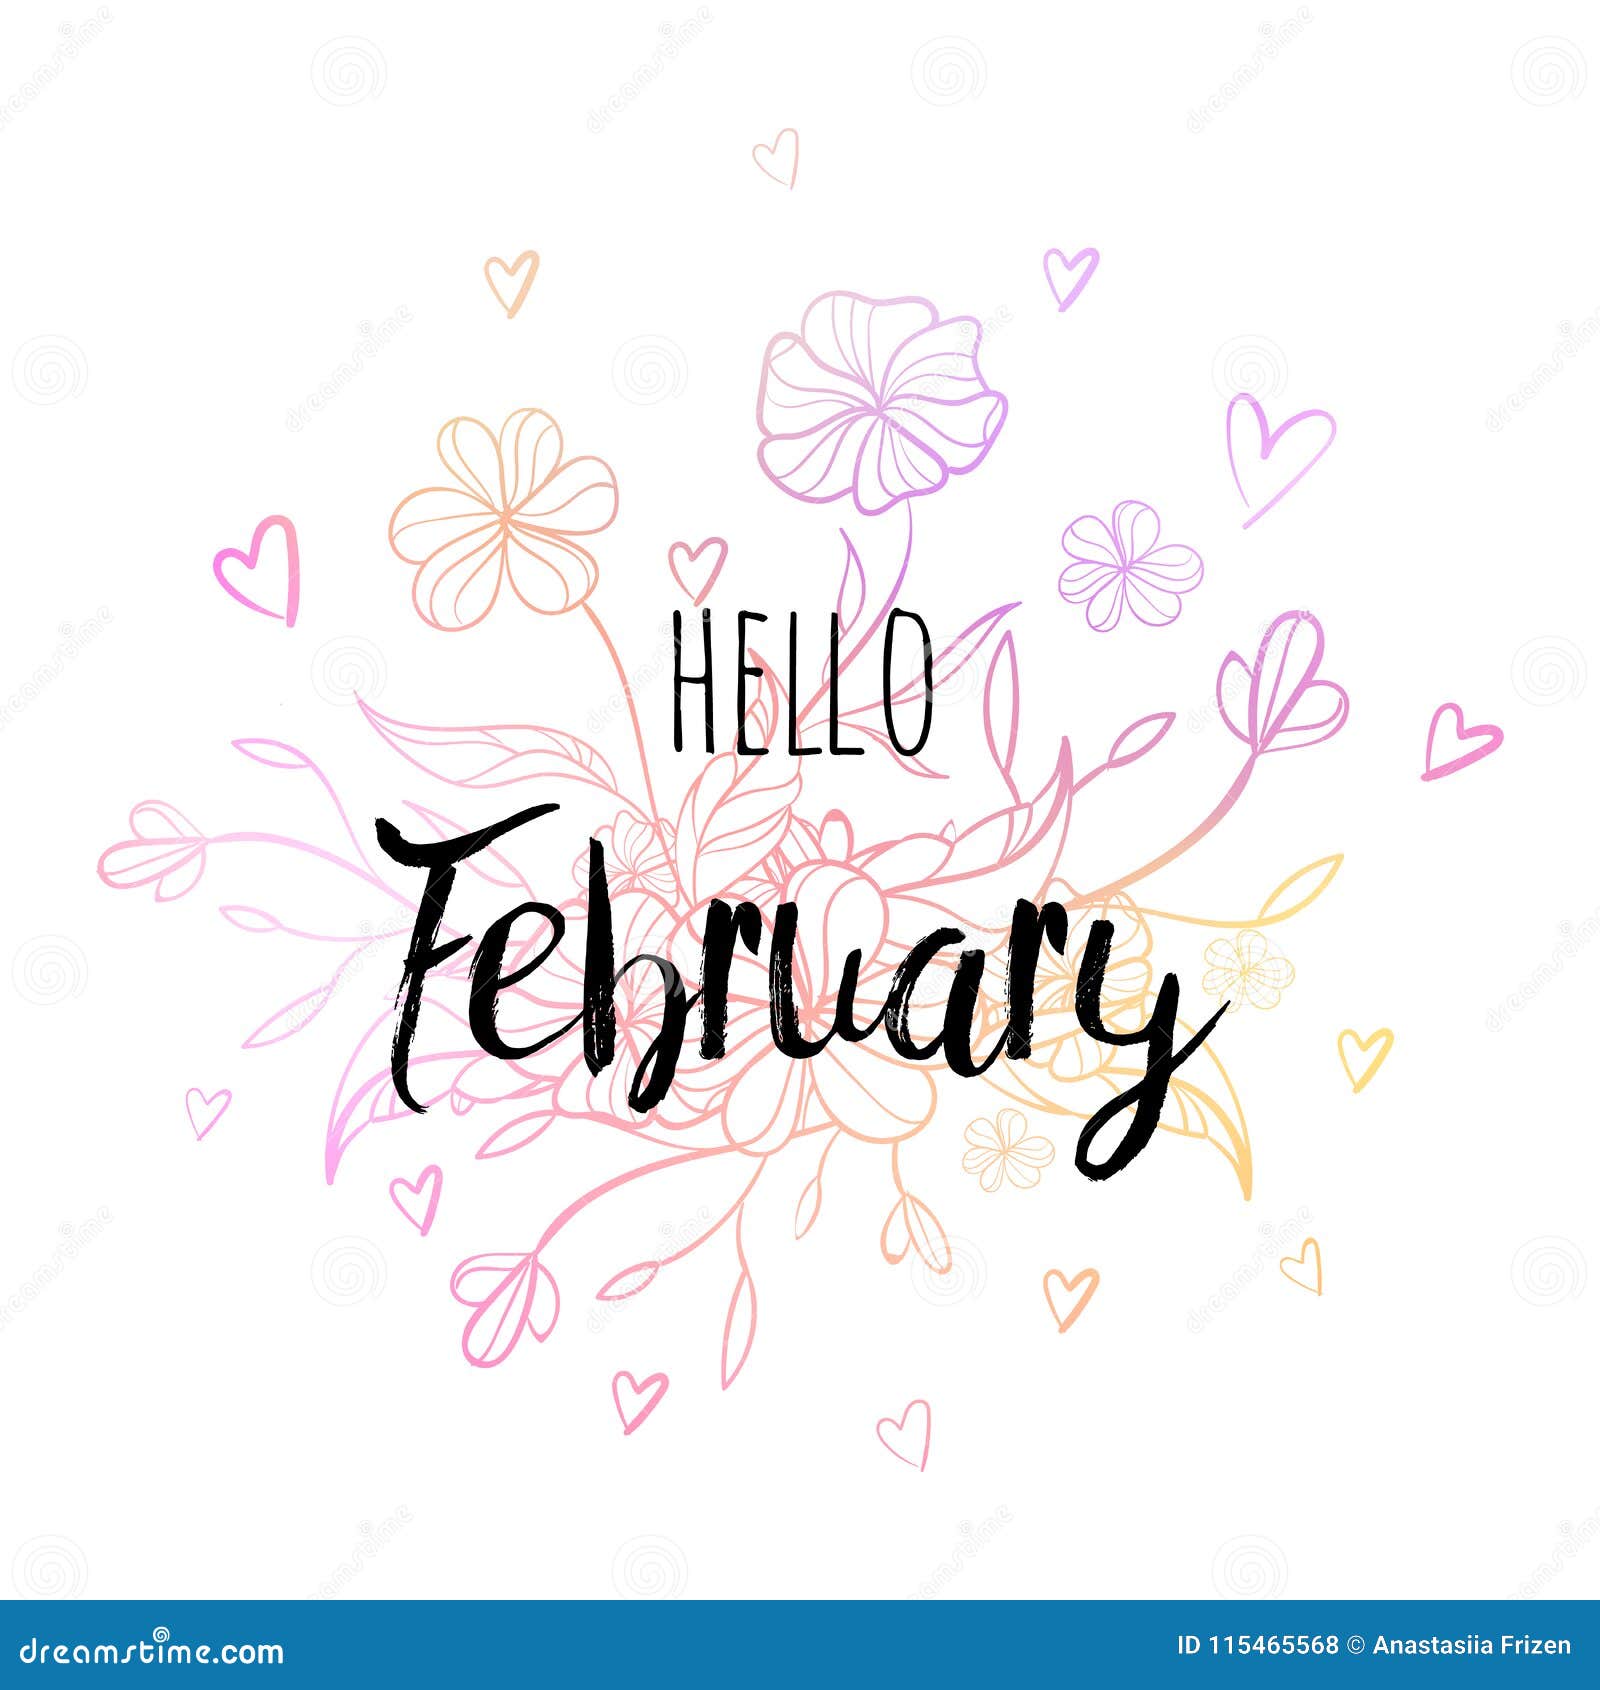 hello february poster with flowers and hearts. motivational print for calendar, glider.